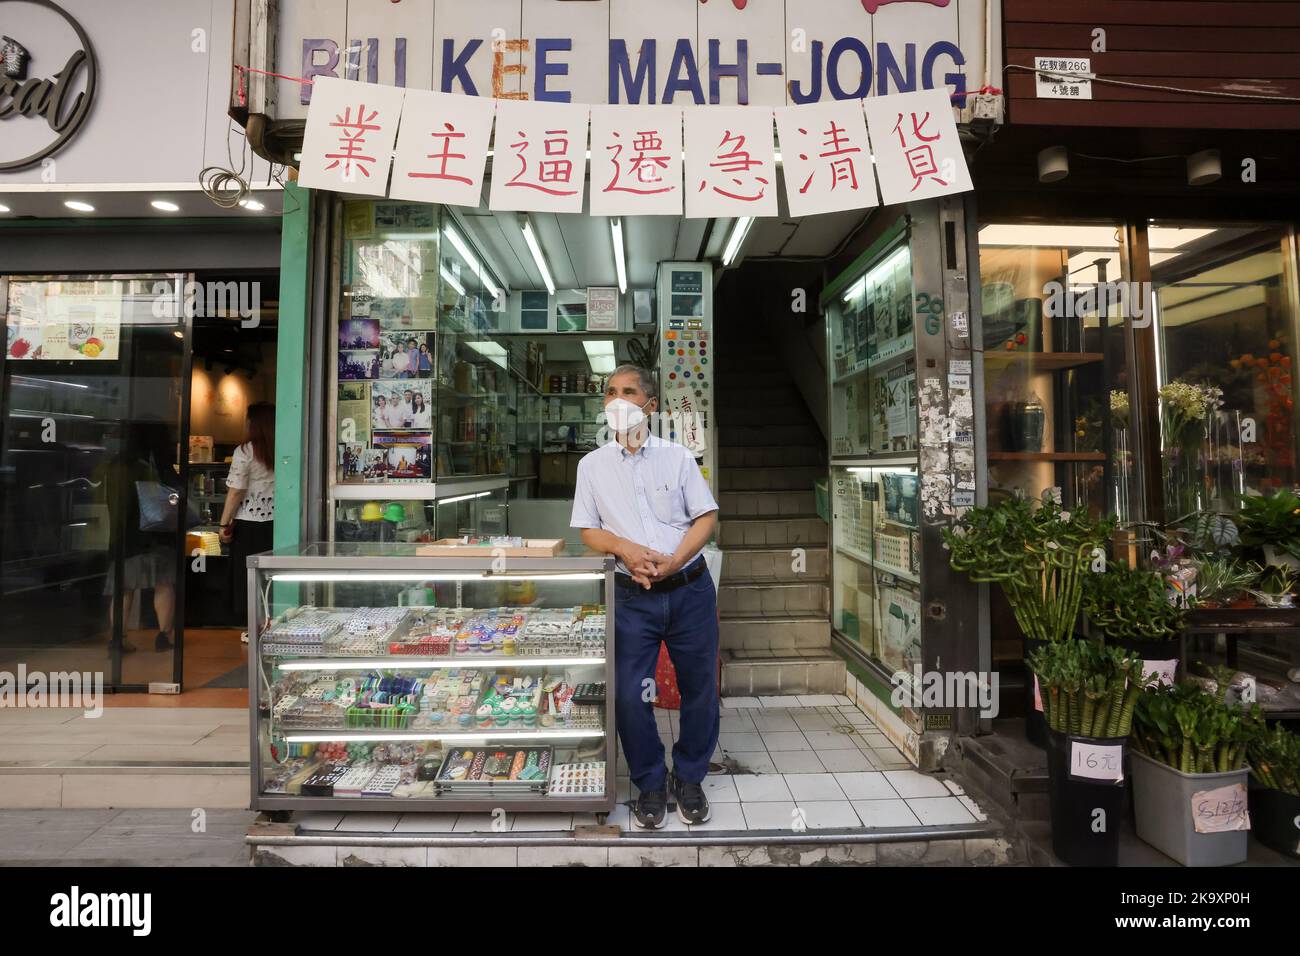 Cheung Shun-king, Mahjong tile artisan and owner of Biu Kee Mah-Jong, poses for a picture at Biu Kee Mah-Jong in Jordan. The old mahjong tile shop is forced to close at the end of October as it is evicted by the Buildings Department.  06OCT22 SCMP / Jonathan Wong Stock Photo